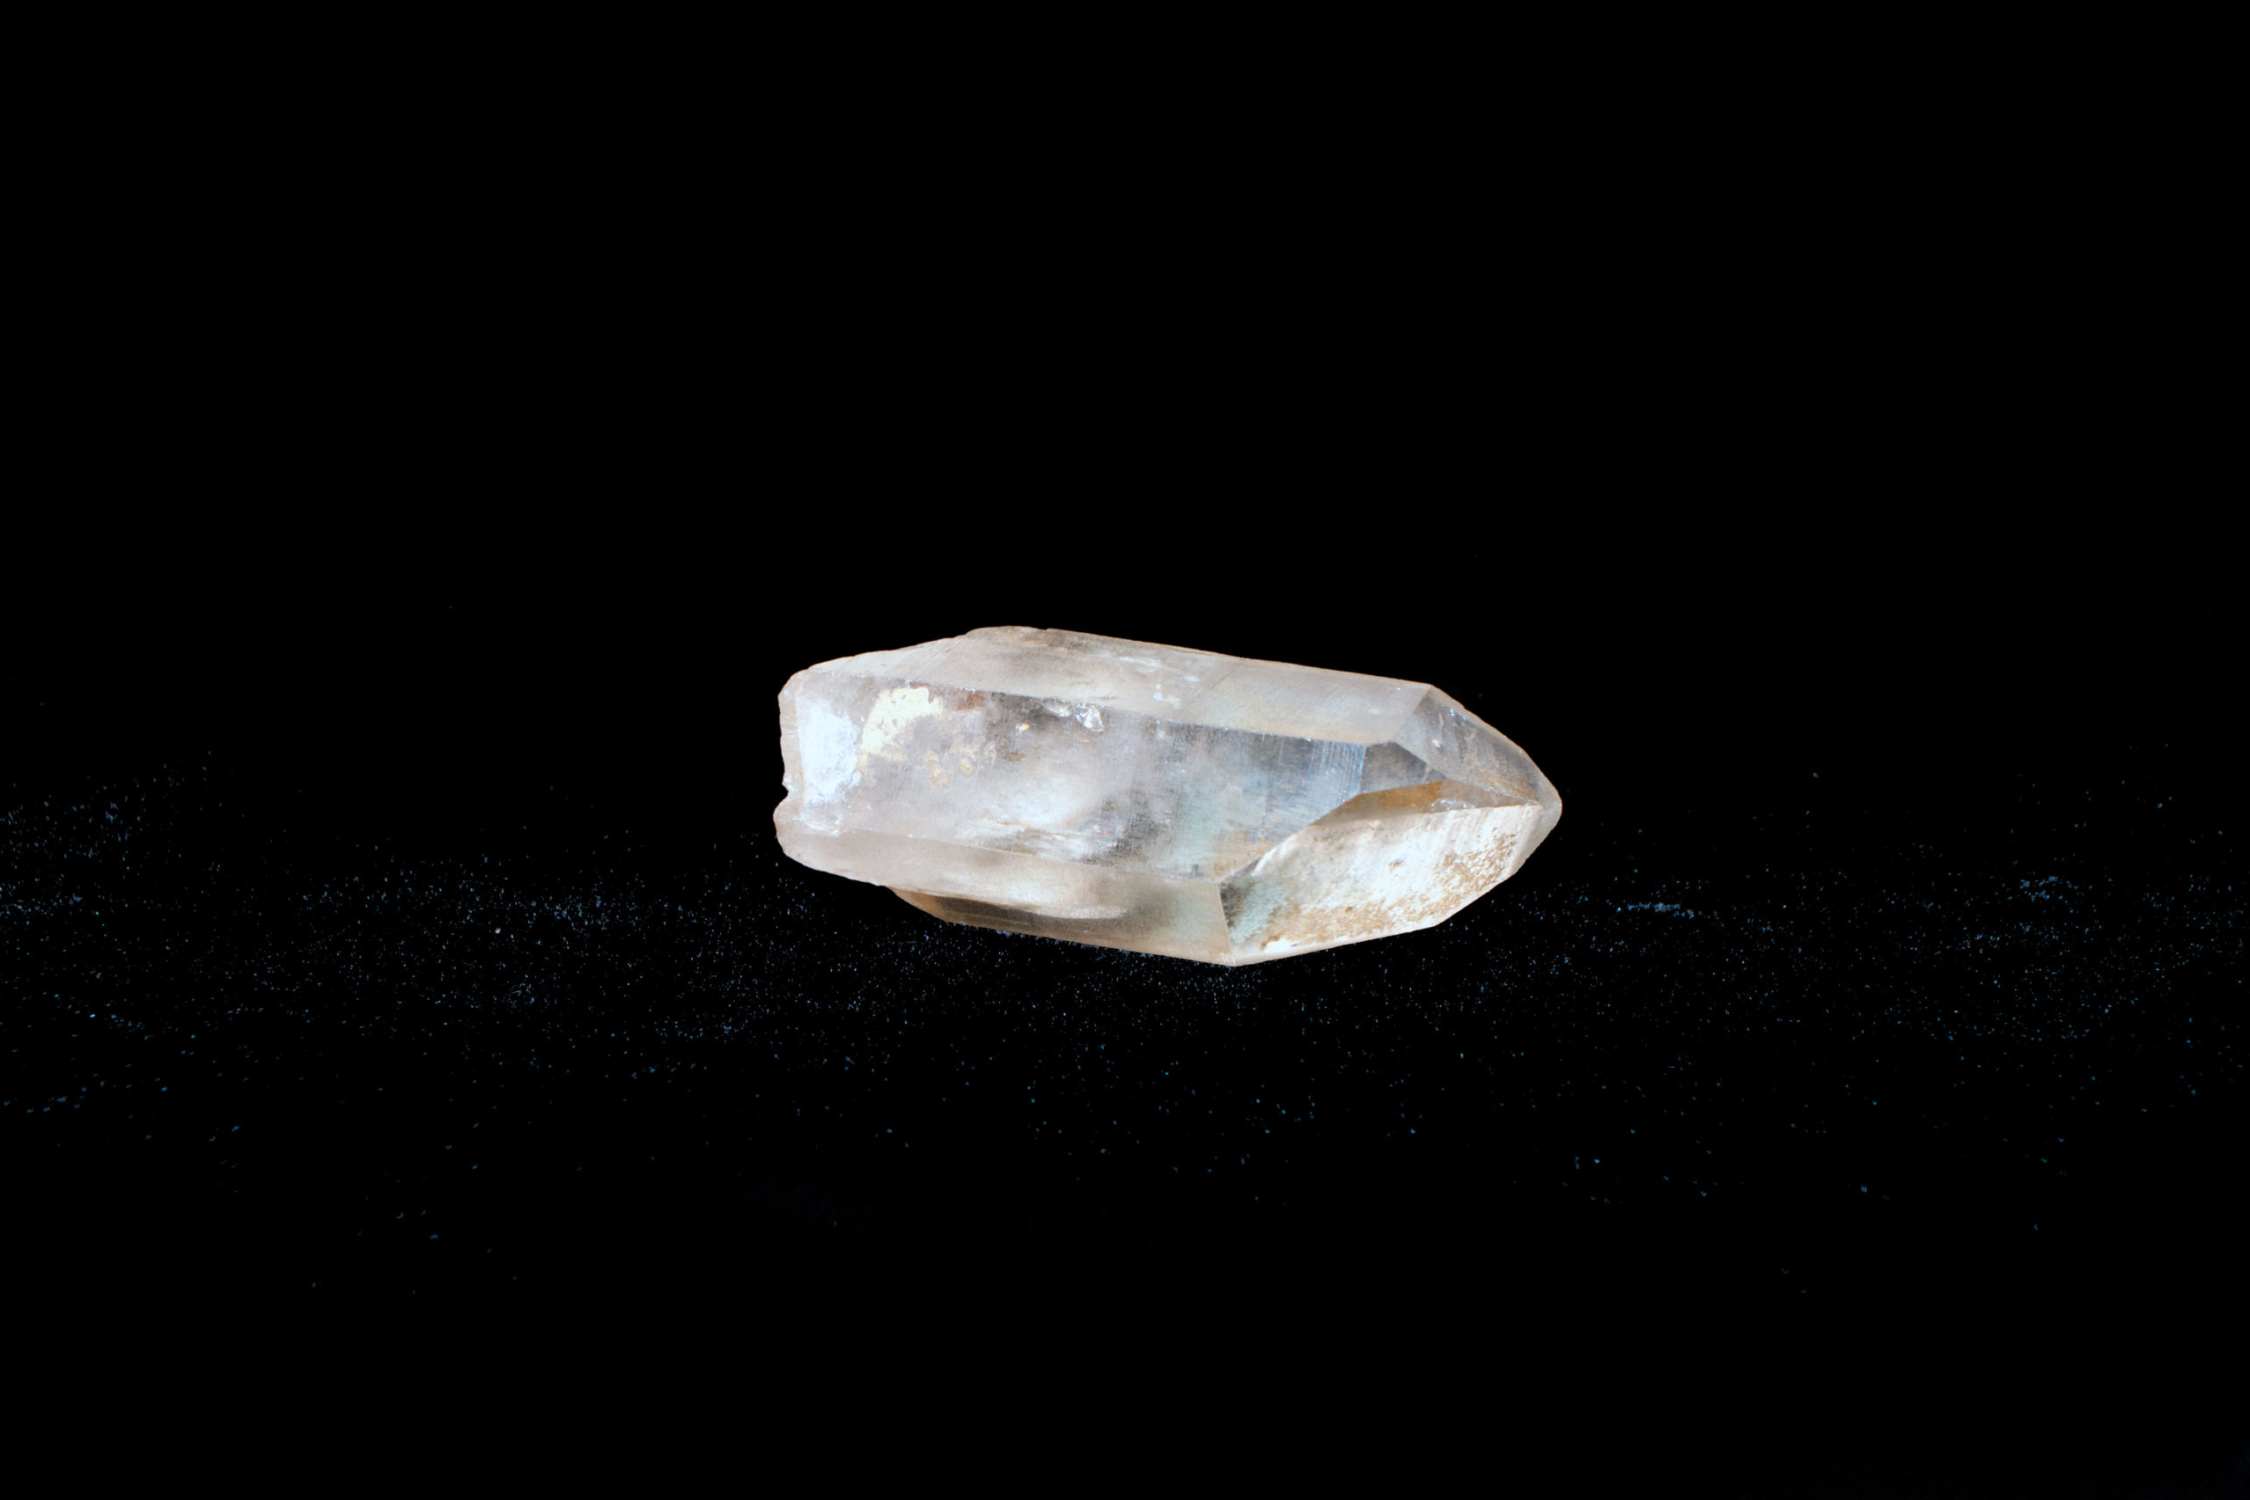 A small piece of clear quartz on a black background.